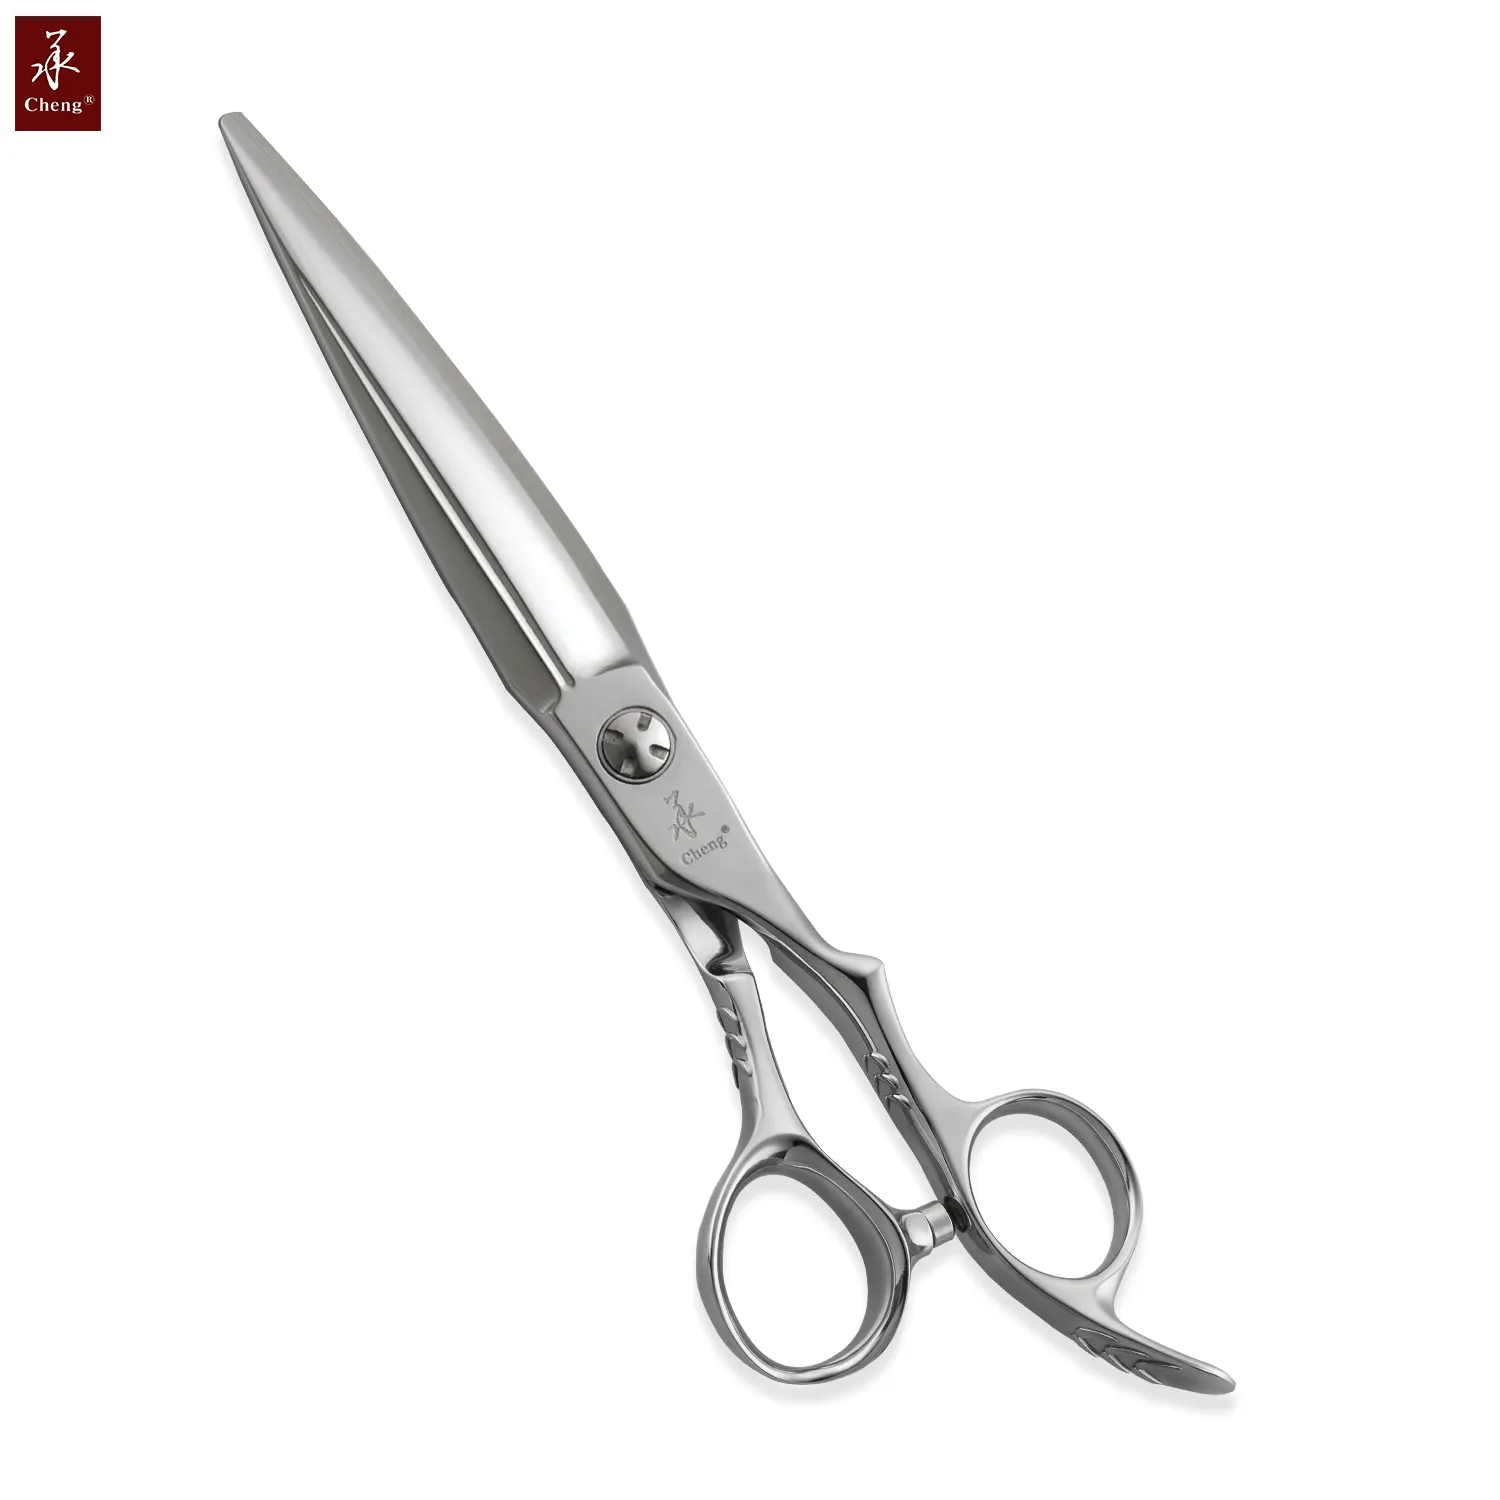 VBA-6.2Z High Quality Hairdressing Scissors 6.2 Inch Japan 440C Stainless Steel CNC Wholesale Hair Cutting Scissors YONGHE